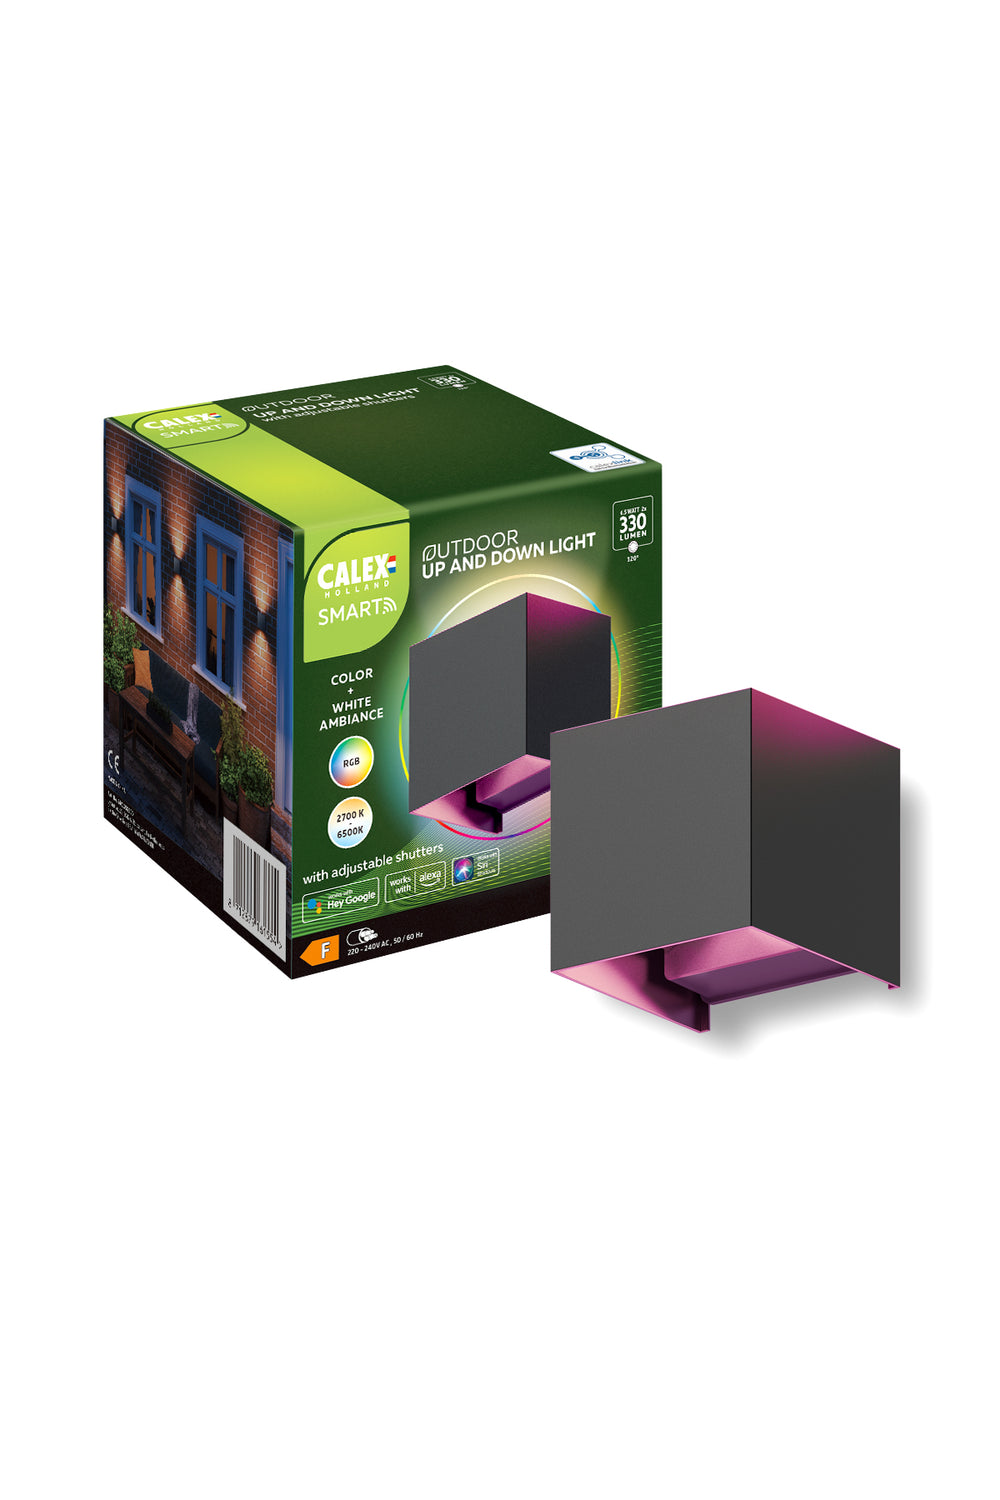 Calex Smart Outdoor Wall Lamp - IP54 - Up&Down - RGB WarmWhite - Black